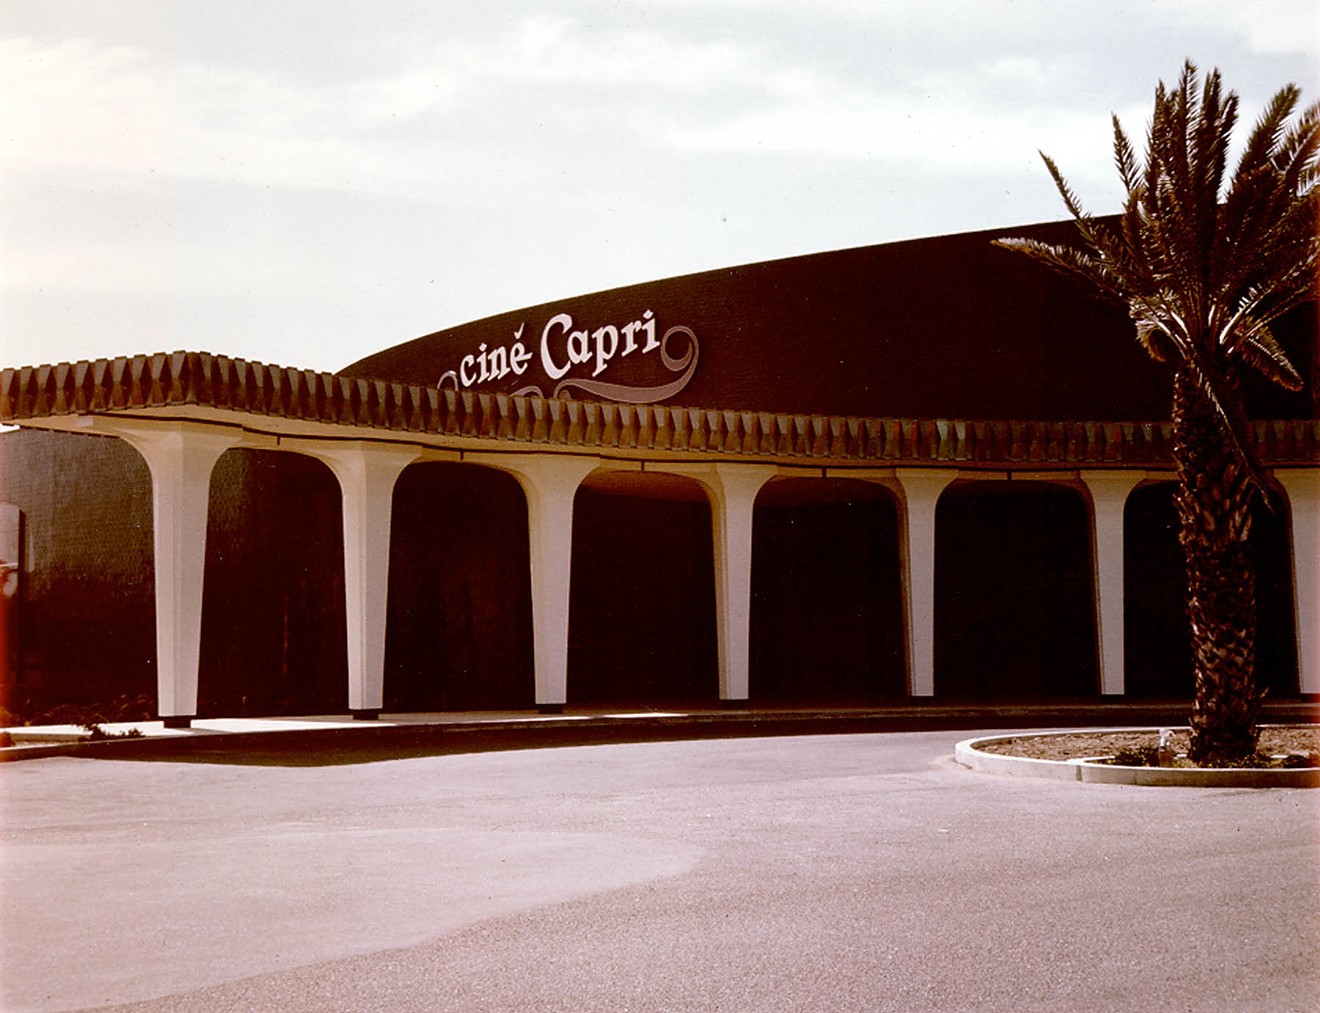 Phoenix's beloved Cine Capri Theatre, which was located at 24th Street and Camelback Road and screened countless Hollywood classic during its 32-year run from 1966 to 1998, including a year-long run by the original "Star Wars."